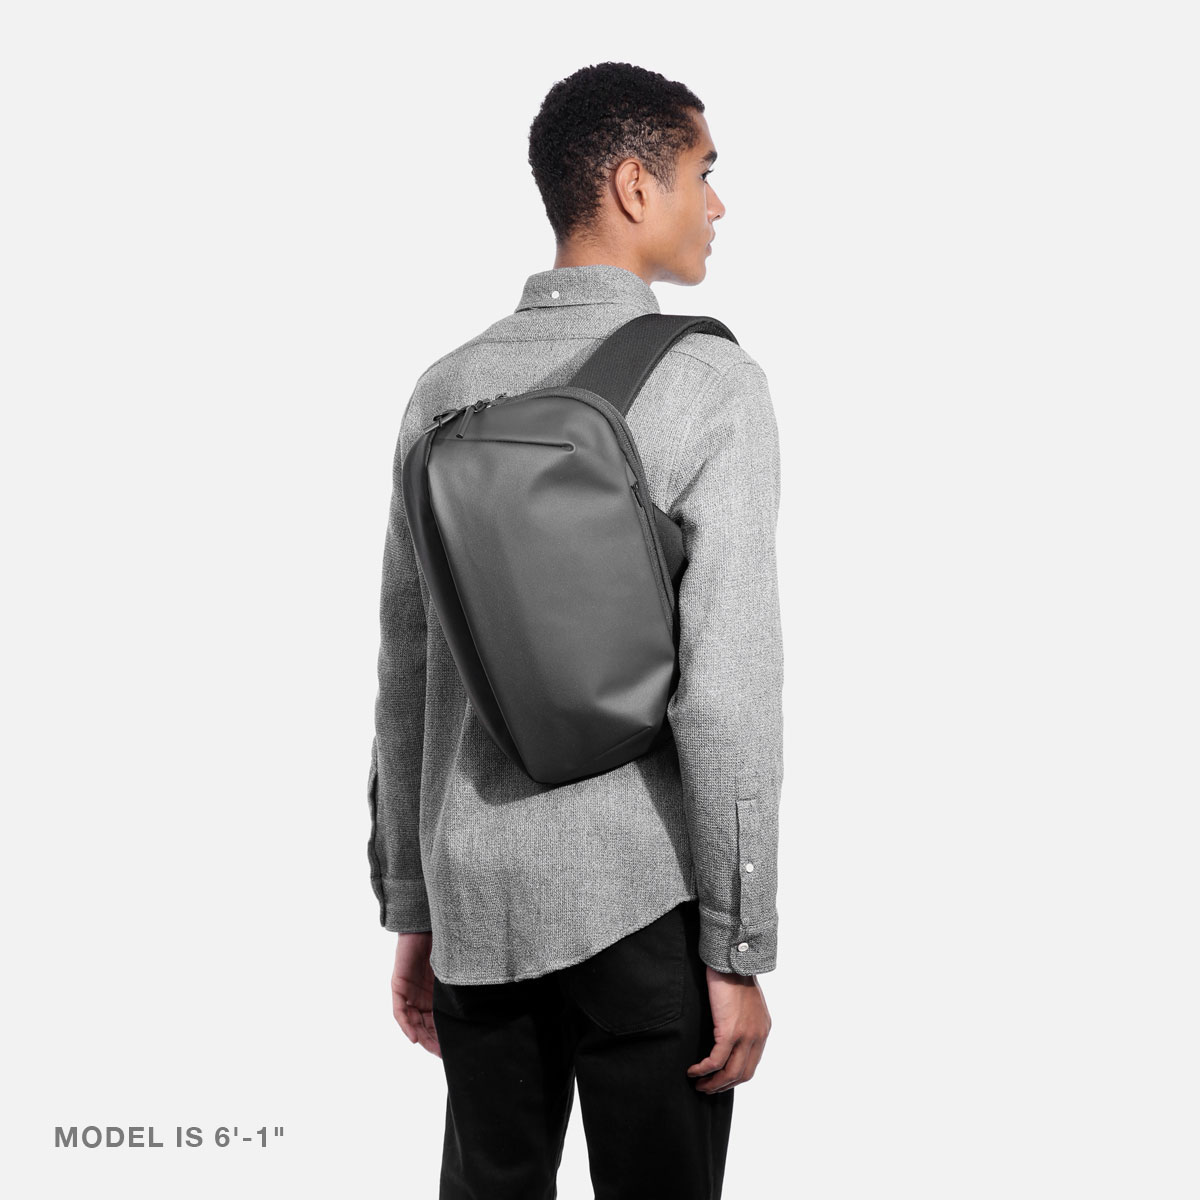 The SWITCH / Laptop Sling - Urbanature Bags by NIID | Detailed Overview -  YouTube